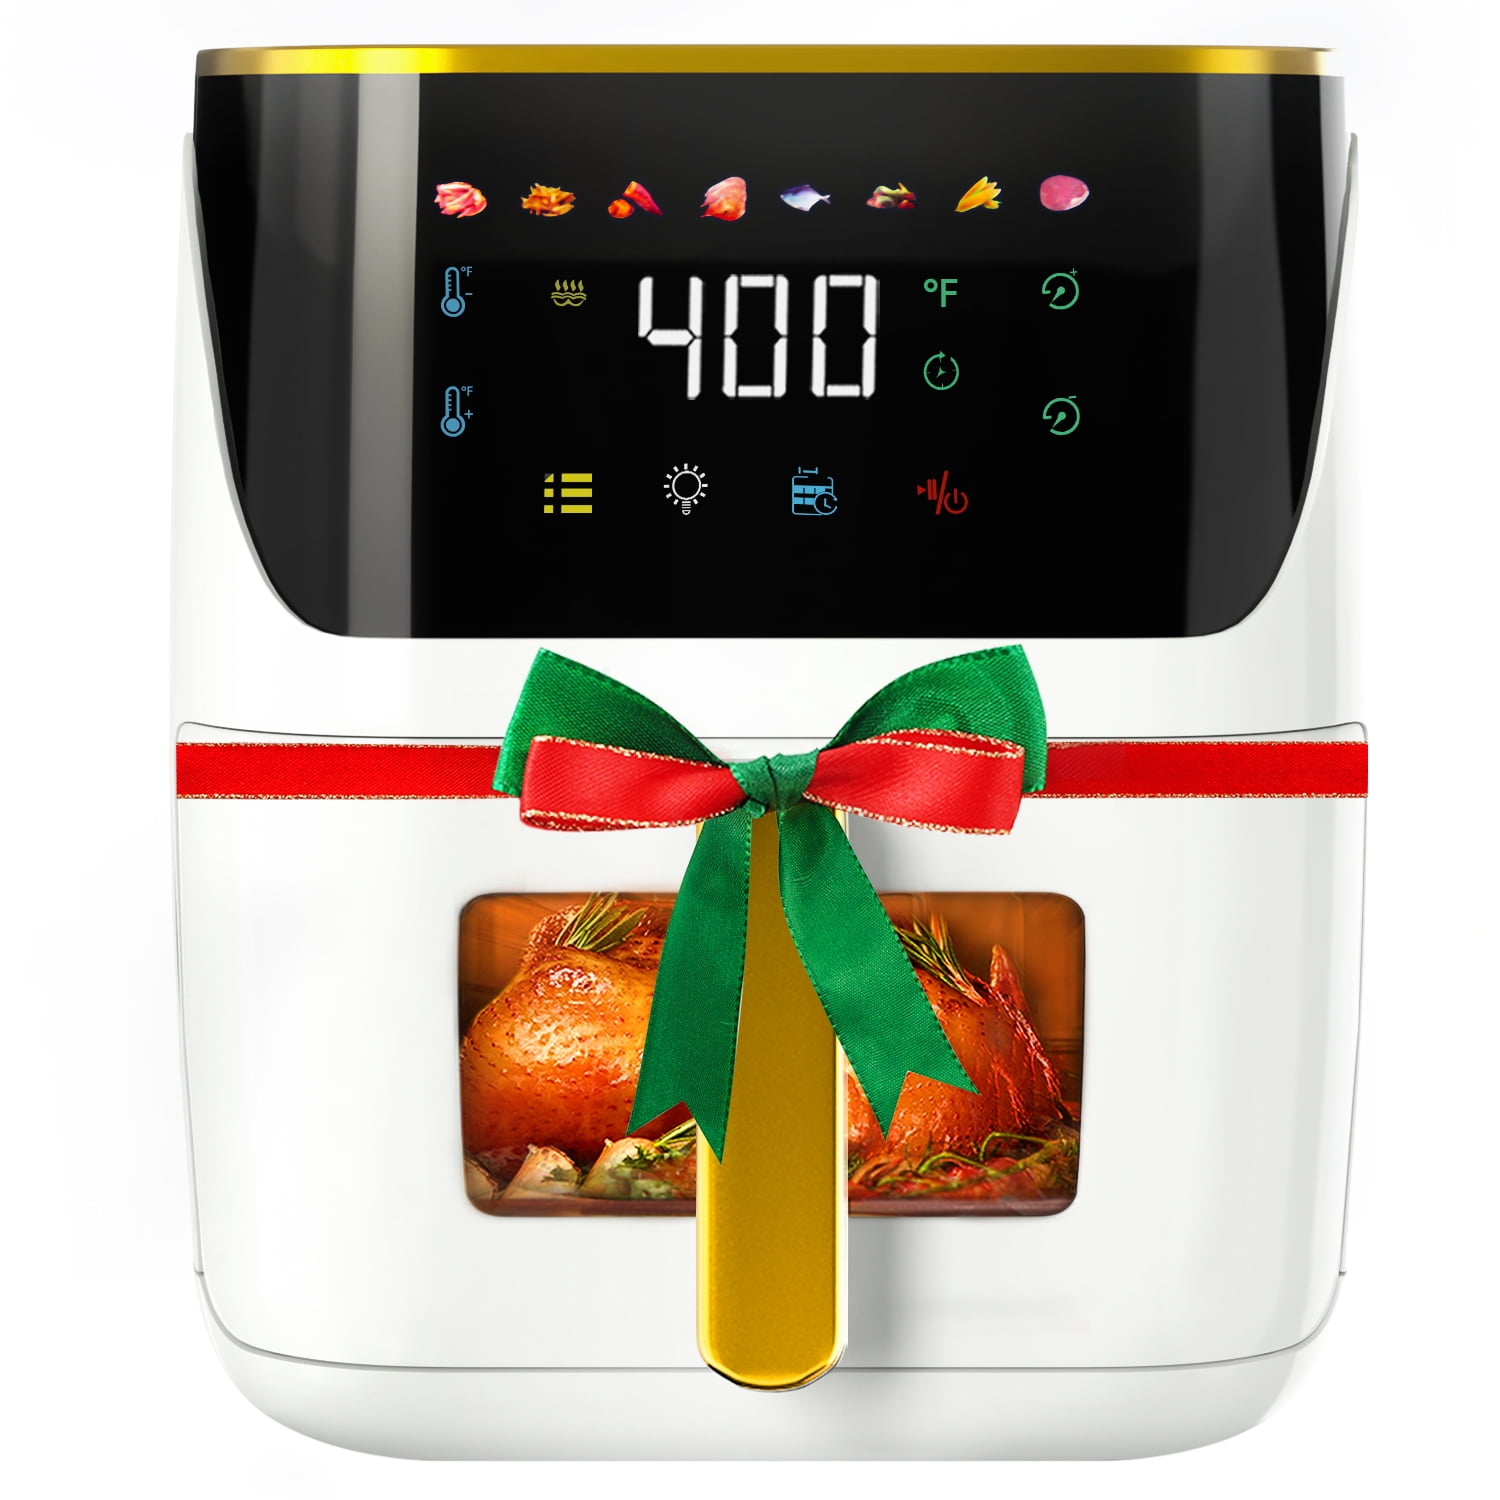 8-in-1 Air Fryer Oven, 6.5 Quart Air Fryer, 1400 W Electric Hot Airfryer  Oven with Digital Touch Screen, ETL Certified 